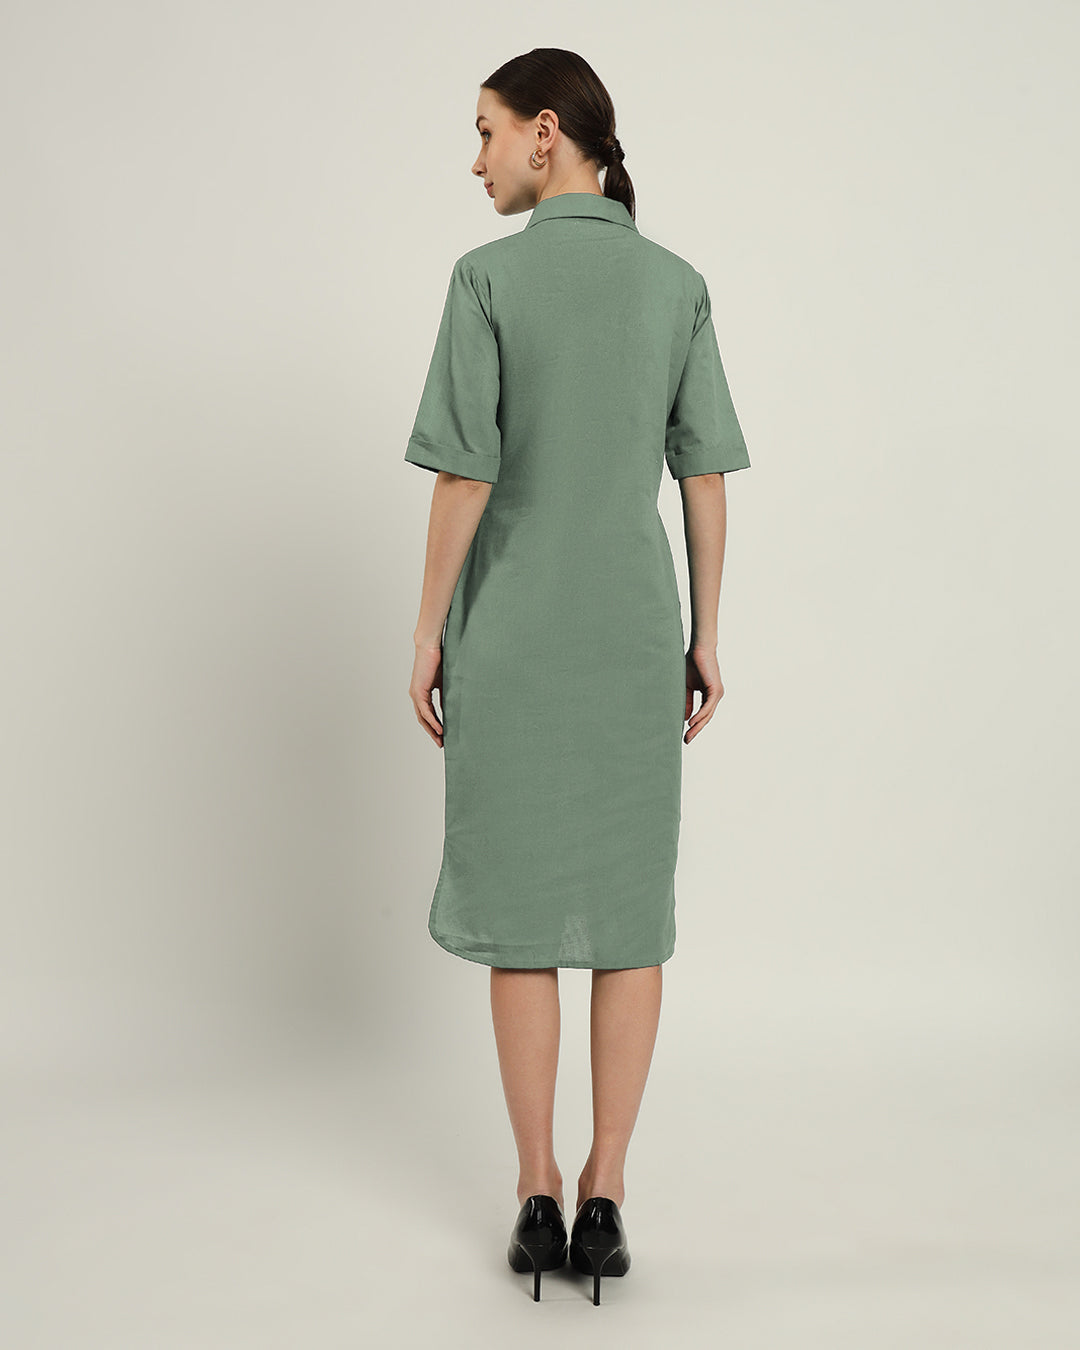 The Tampa Mint Cotton Dress